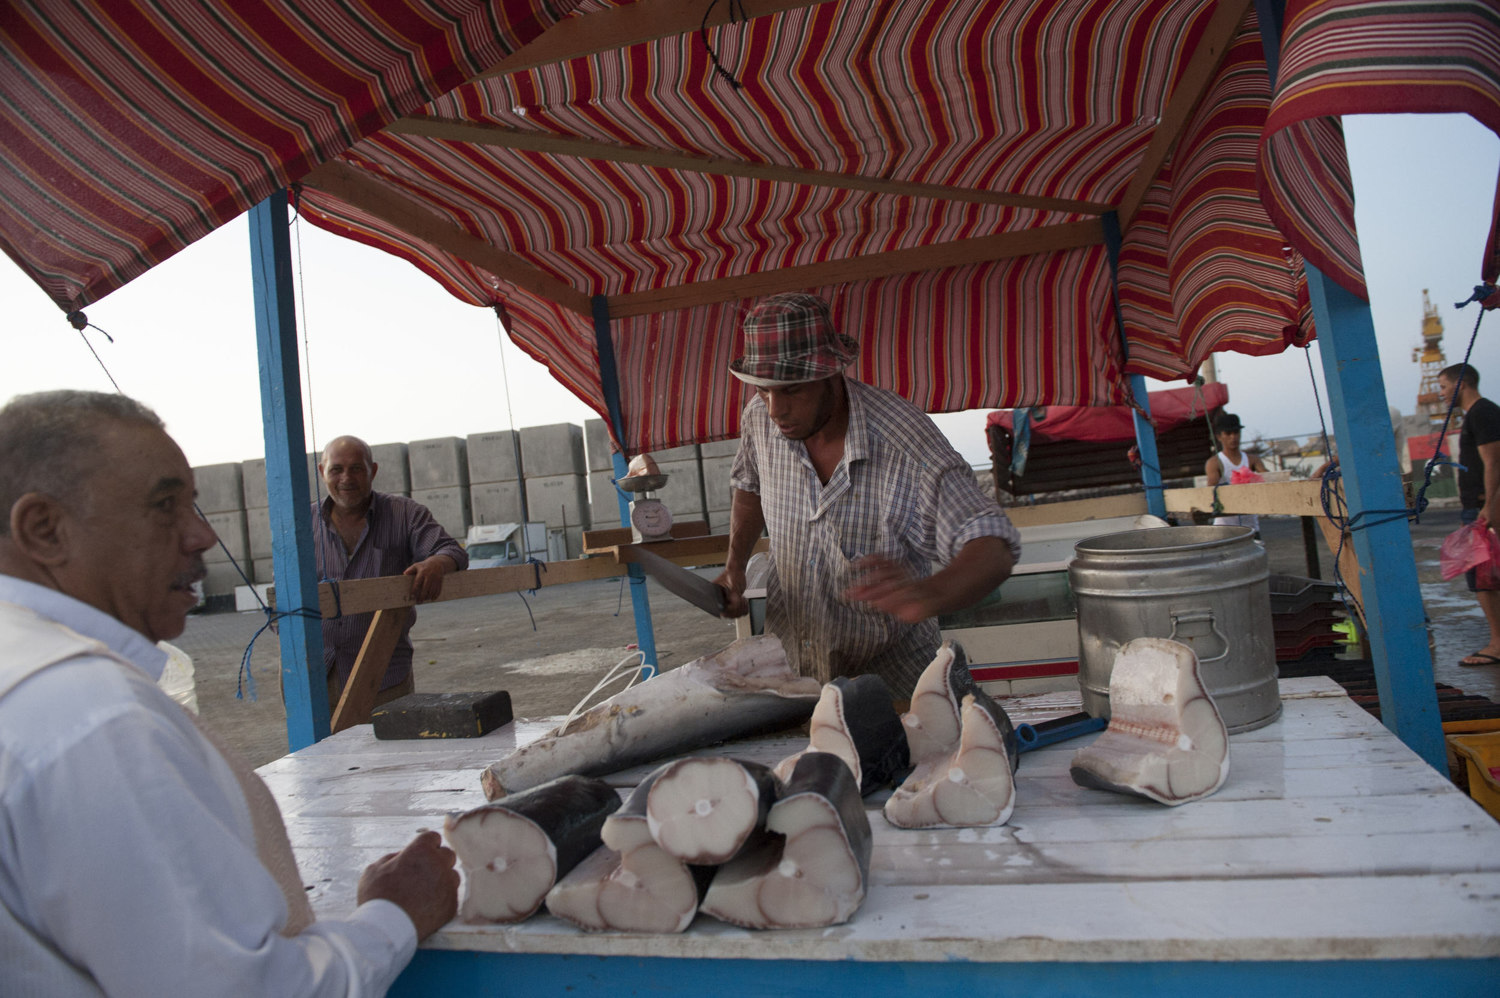  Al Araby, an Egyptian man cuts and sells shark pieces to a customer at a roadside fish market in Tripoli, Libya. Many Egyptians come to Libya to find work in the strong oil economy. 

 